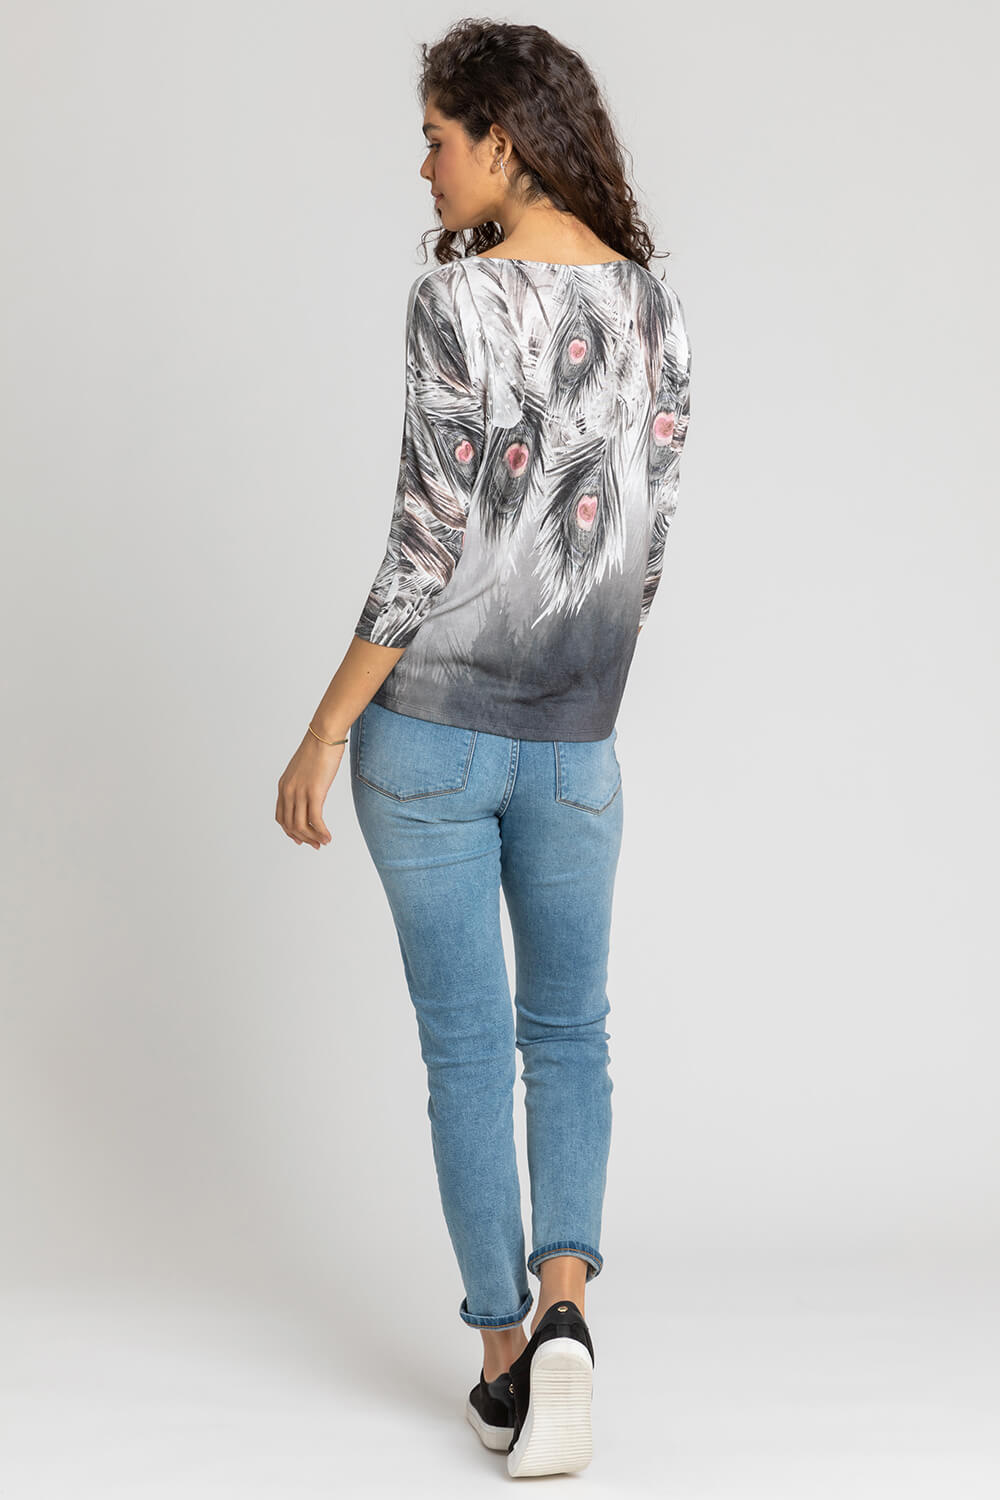 Grey Feather Border Print Top, Image 2 of 4